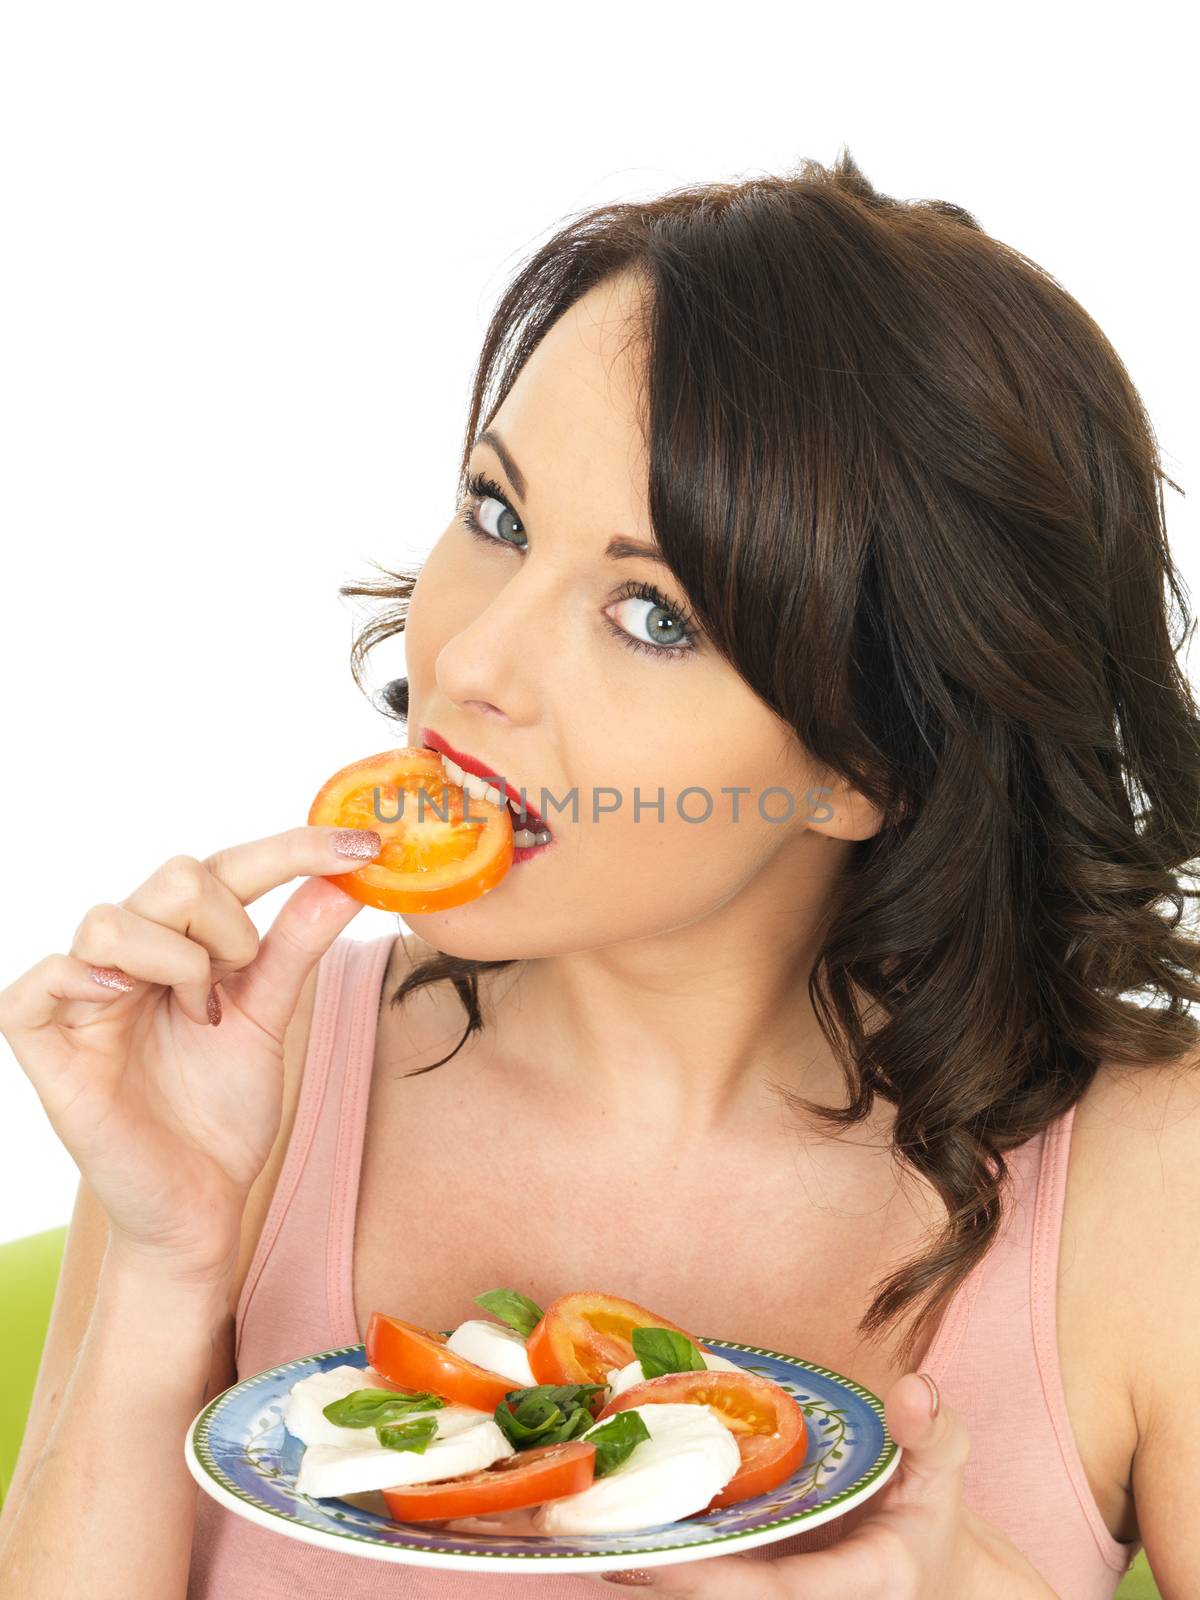 Attractive Young Woman  Eating A Slice of Tomato by Whiteboxmedia